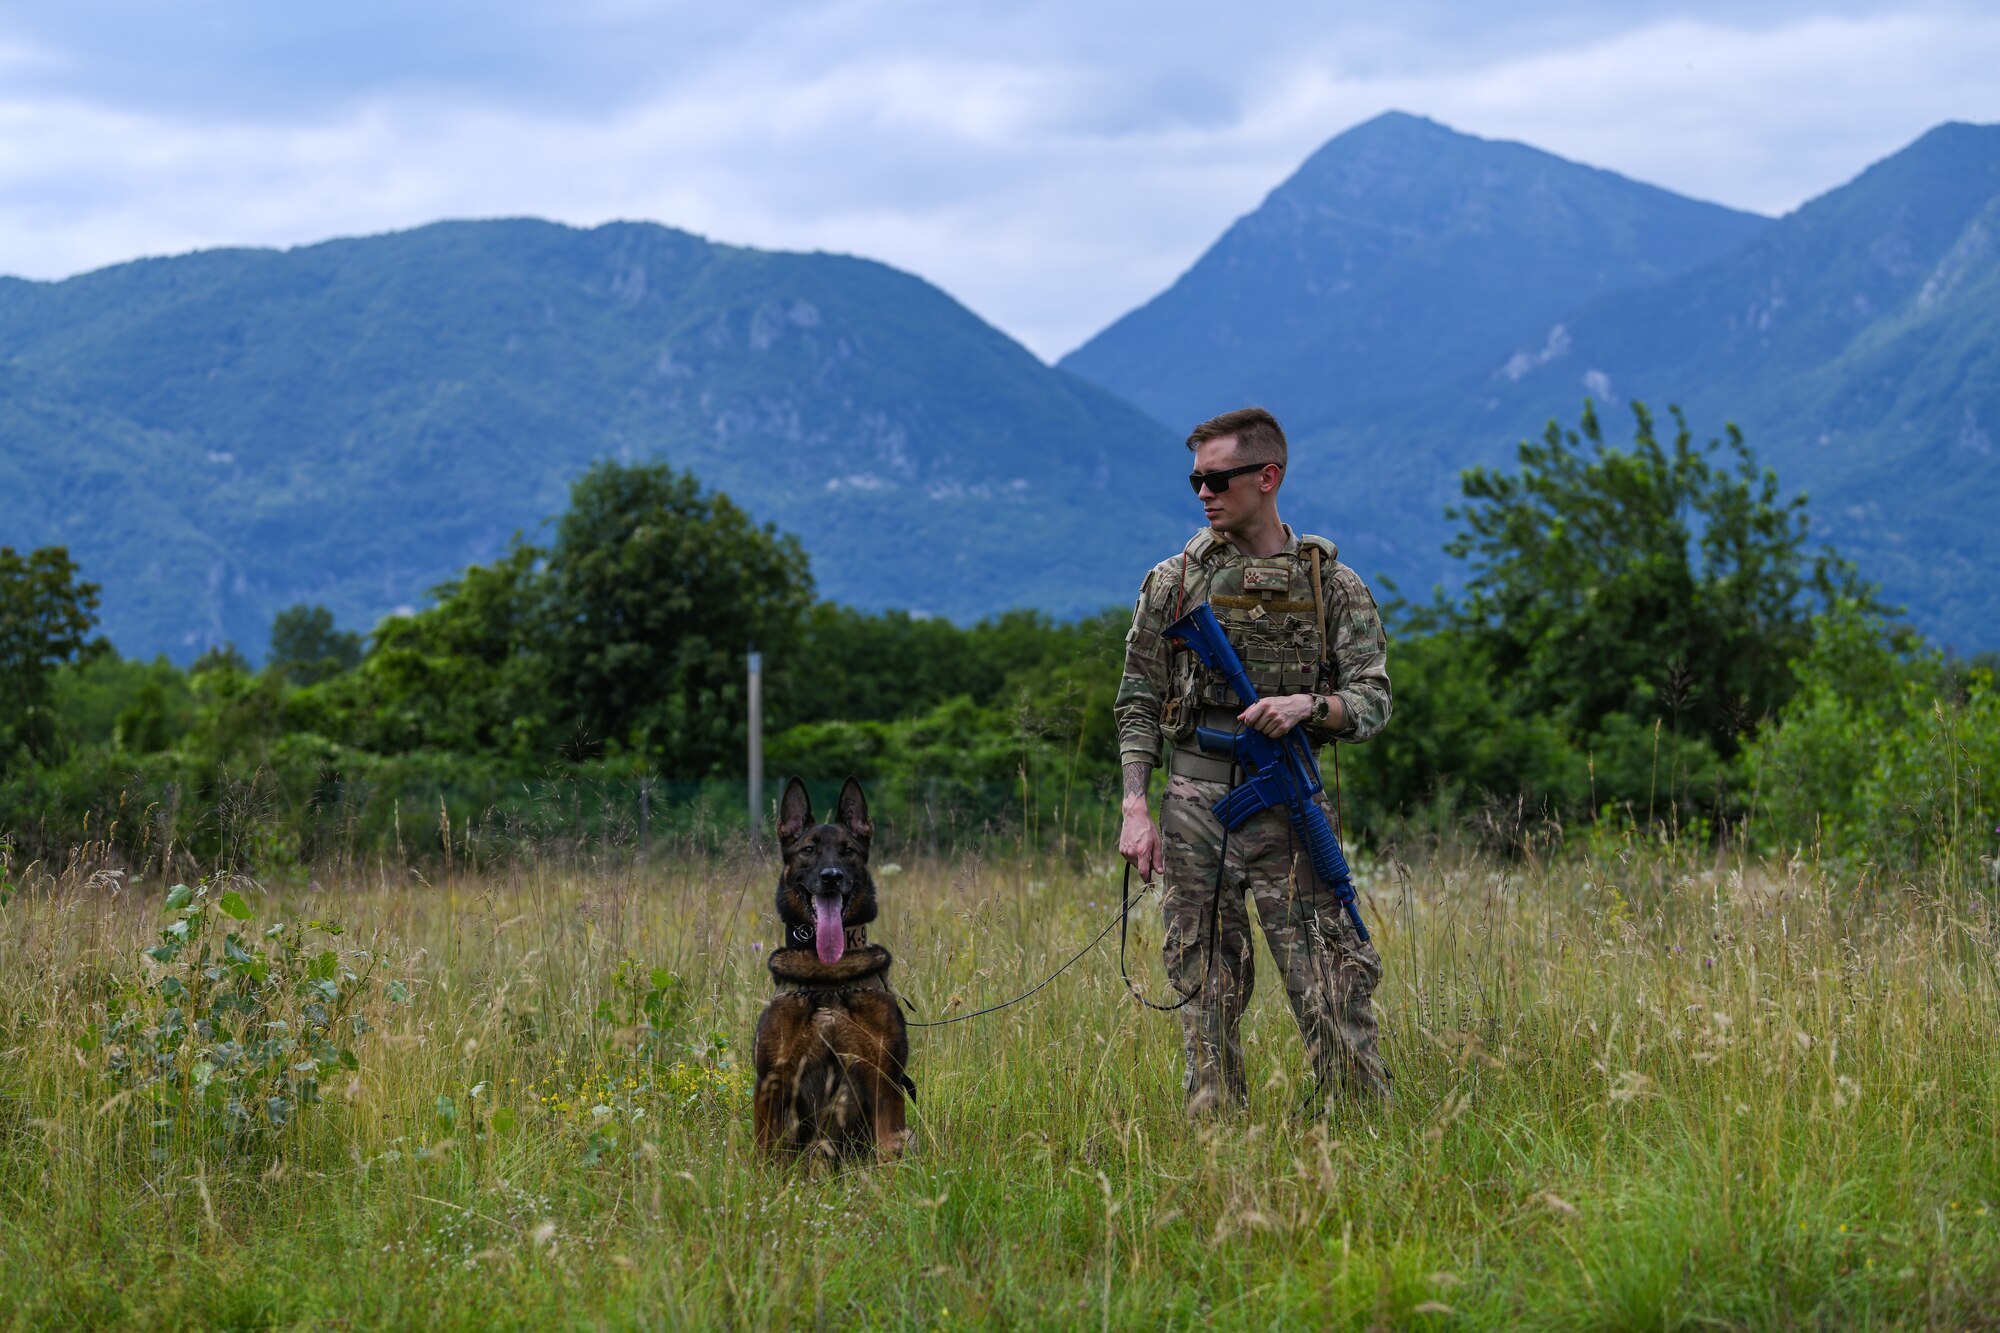 U.S. Air Force Staff Sgt. Benjamin Howard, 31st Security Force Squadron military working dog handler and his K-9 counterpart, Kay, surveils the landscape during Operation Porcupine, June 30, 2020 at Osoppo, Italy. The 31st SFS maintains installation force protection during peacetime and wartime operations within eight separate base areas. (U.S. Air Force photo by Airman 1st Class Ericka A. Woolever)